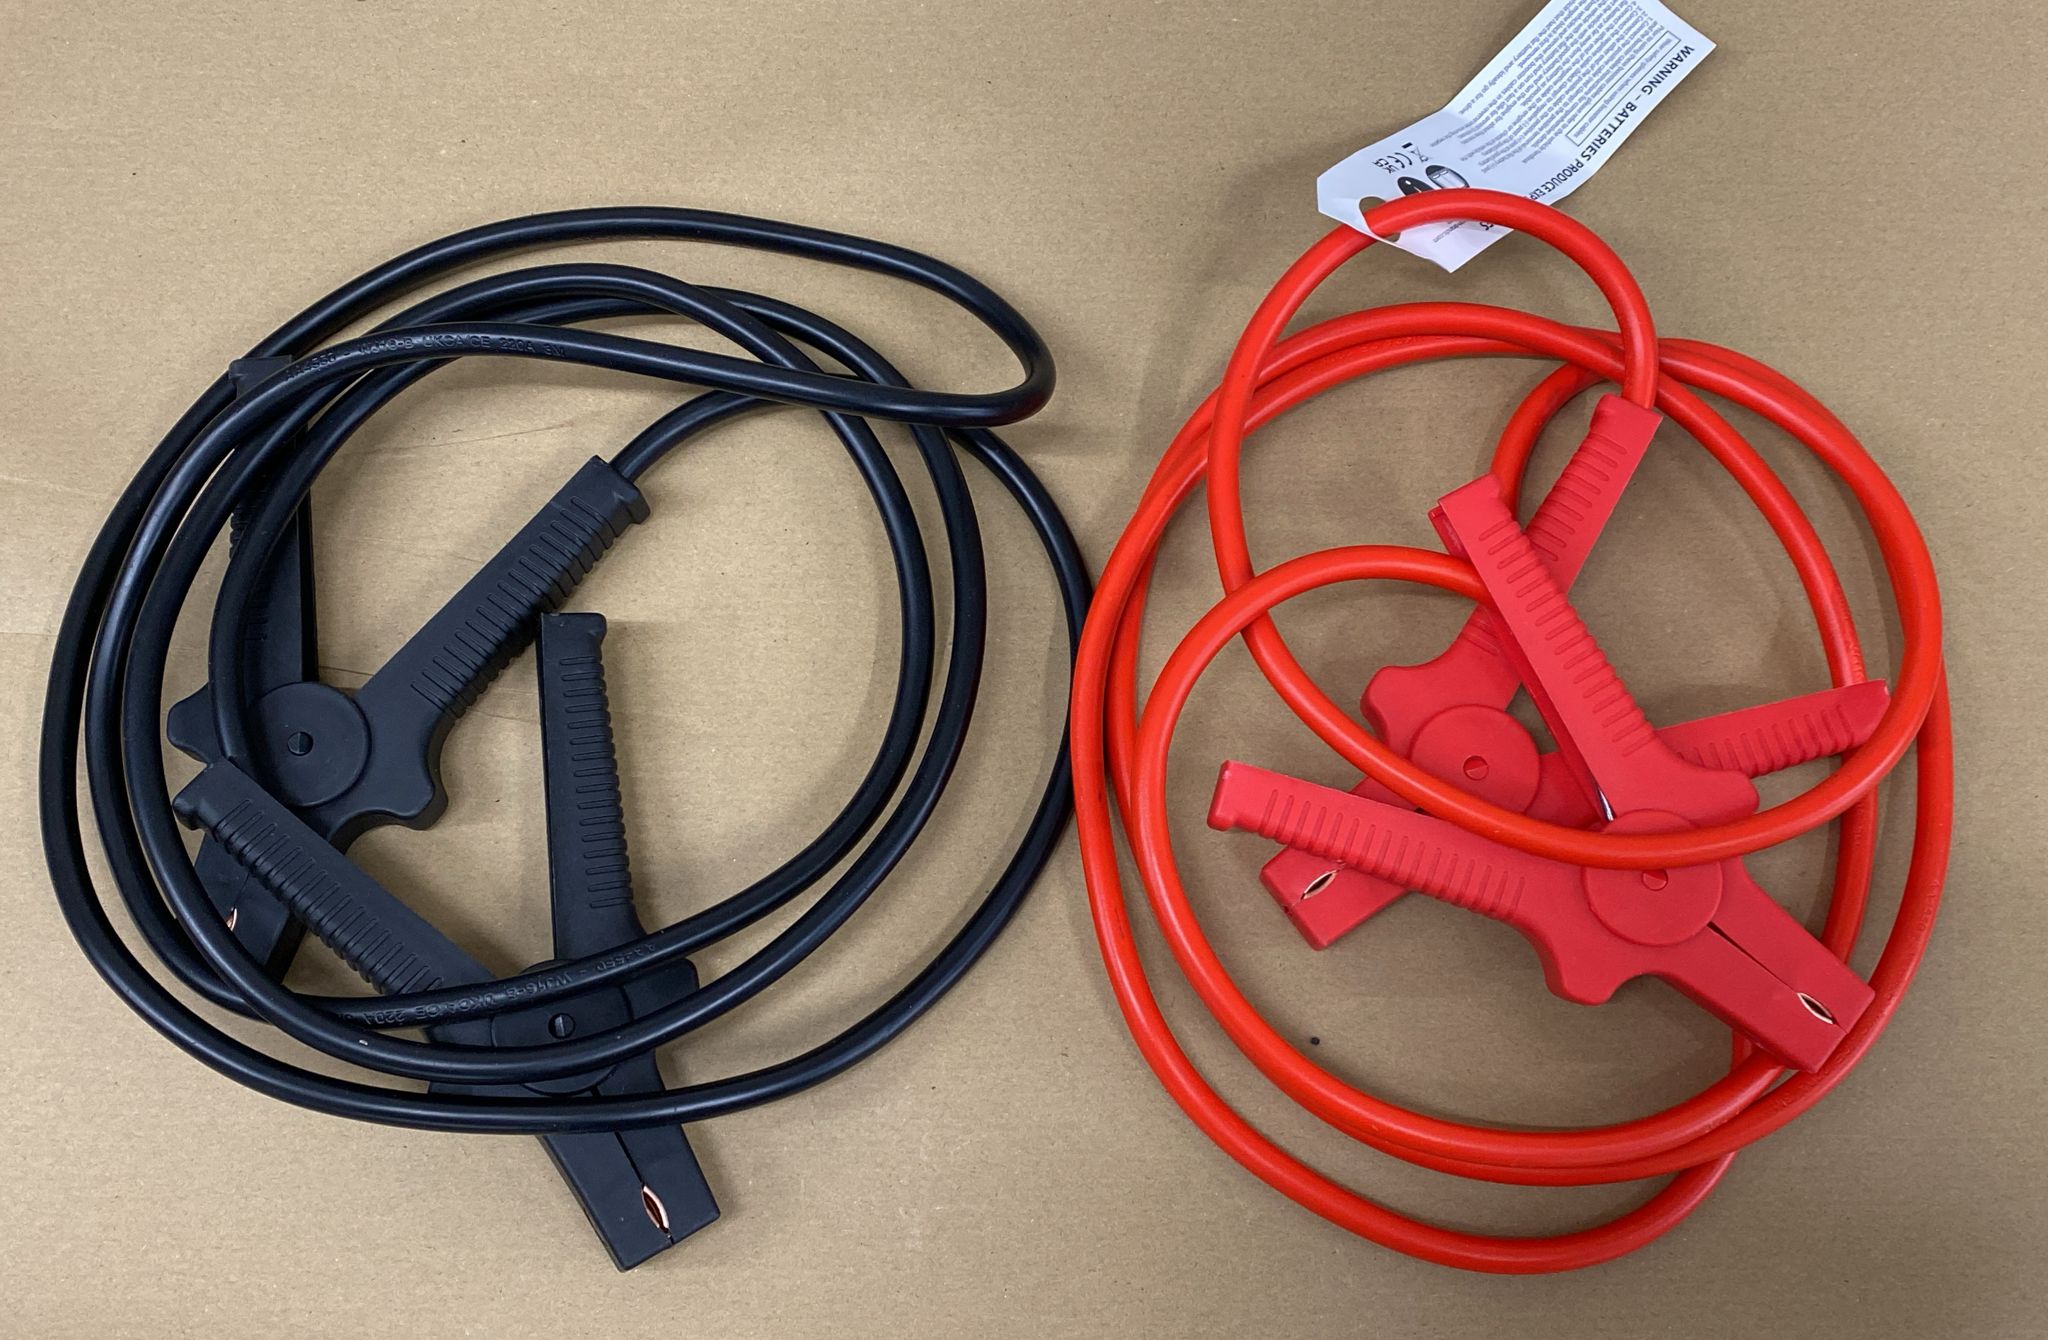 AA Insulated Booster Cables/Jump Leads AA4550-550U